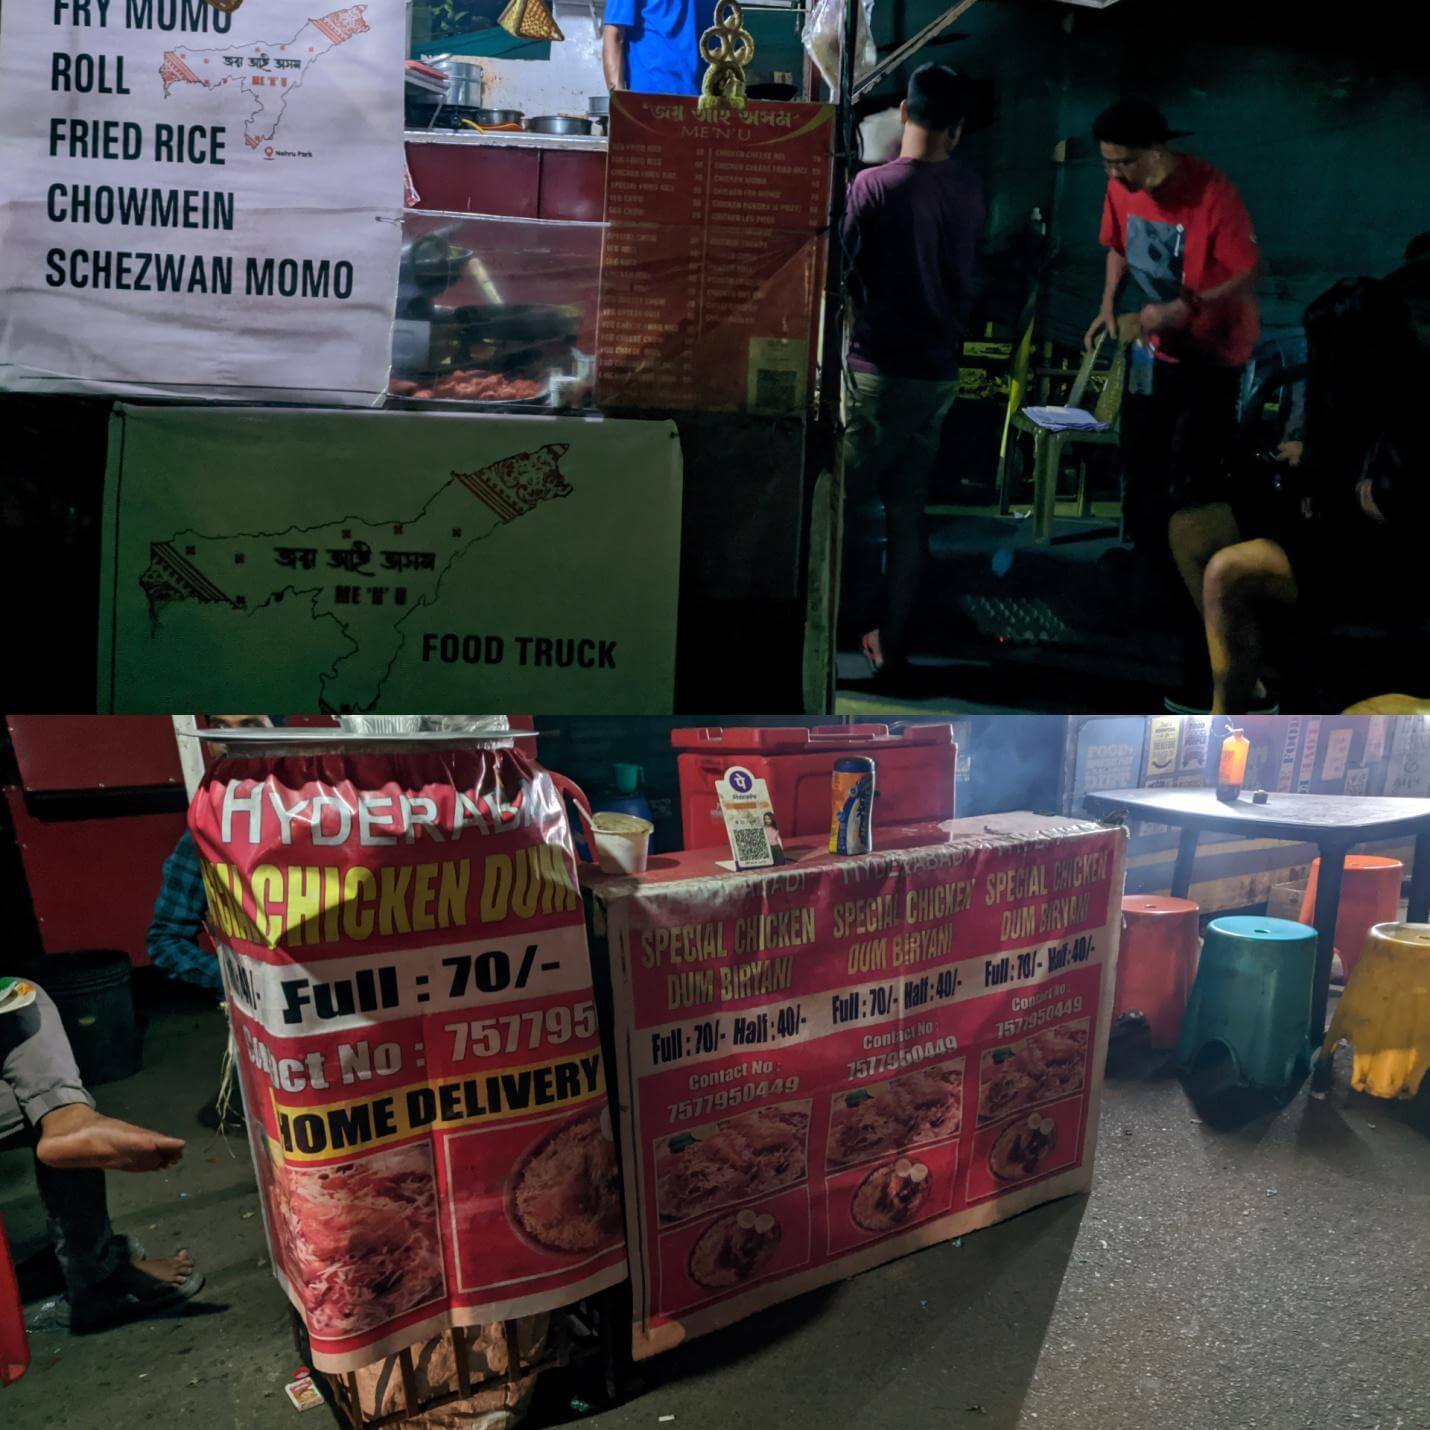 Chinese fusion food marketed as Assamese food on ‘Jai Aai Axom’ (‘Hail the Motherland Assam’) food truck; and colourful pilao sold as ‘Hyderabadi biryani’